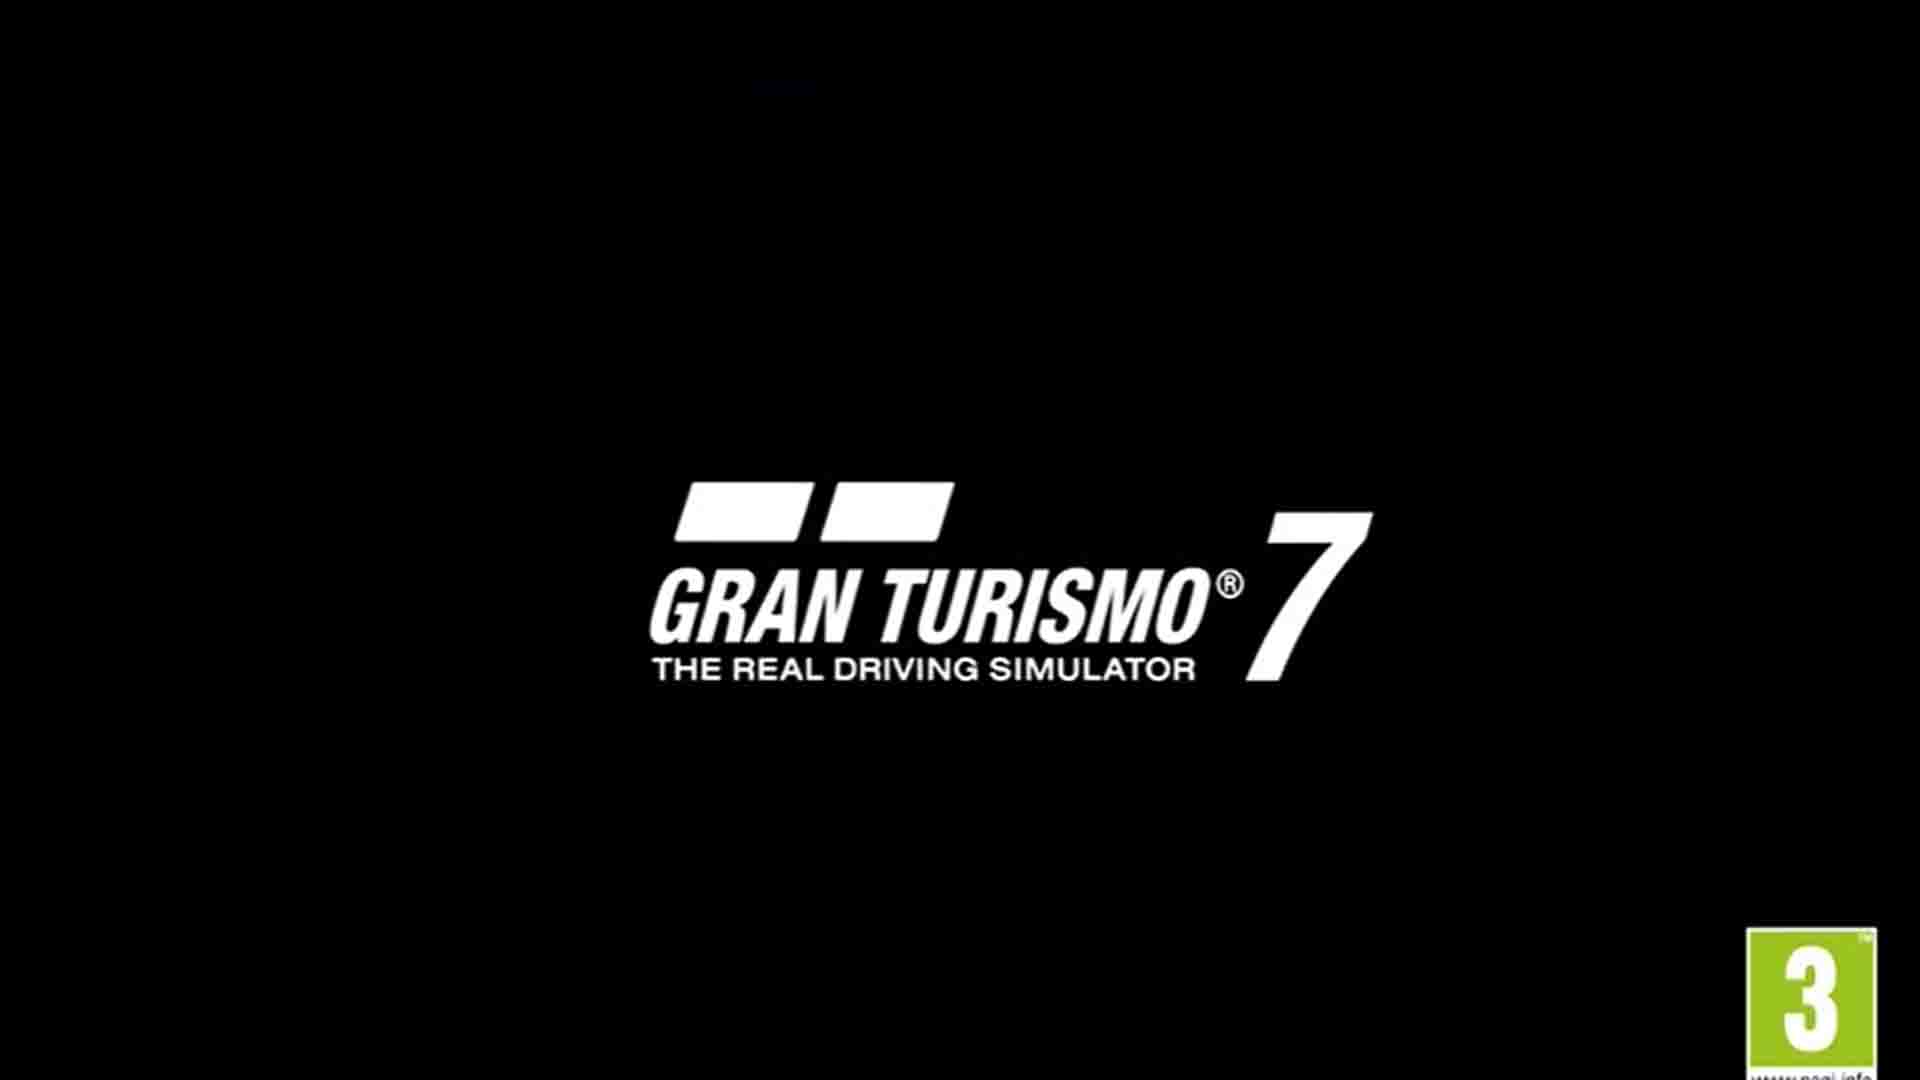 Gran Turismo 7 shares how it brings a circuit